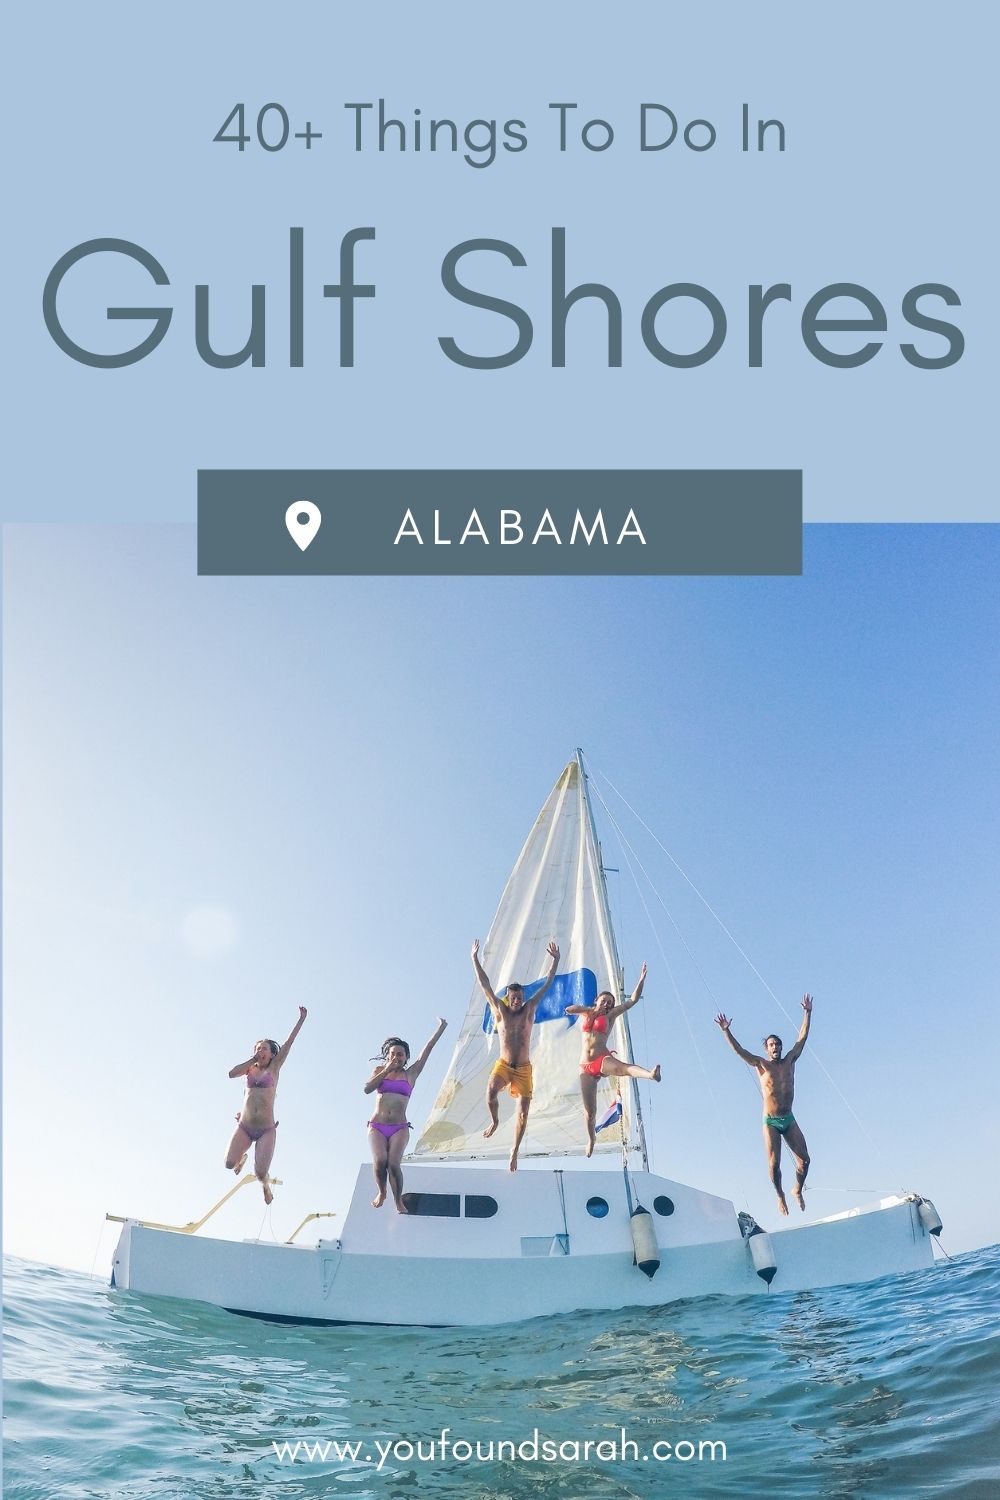 Gulf Shores: 40 Things to Do (Not One Tourist Trap!) Most visitors come to the area for Alabama’s amazing beaches. However, there are so many other things to do in Gulf Shores besides just lounge on in the powdery sand! In this post, you’ll find plenty of things to do on the water as well as ideas for you land lovers.